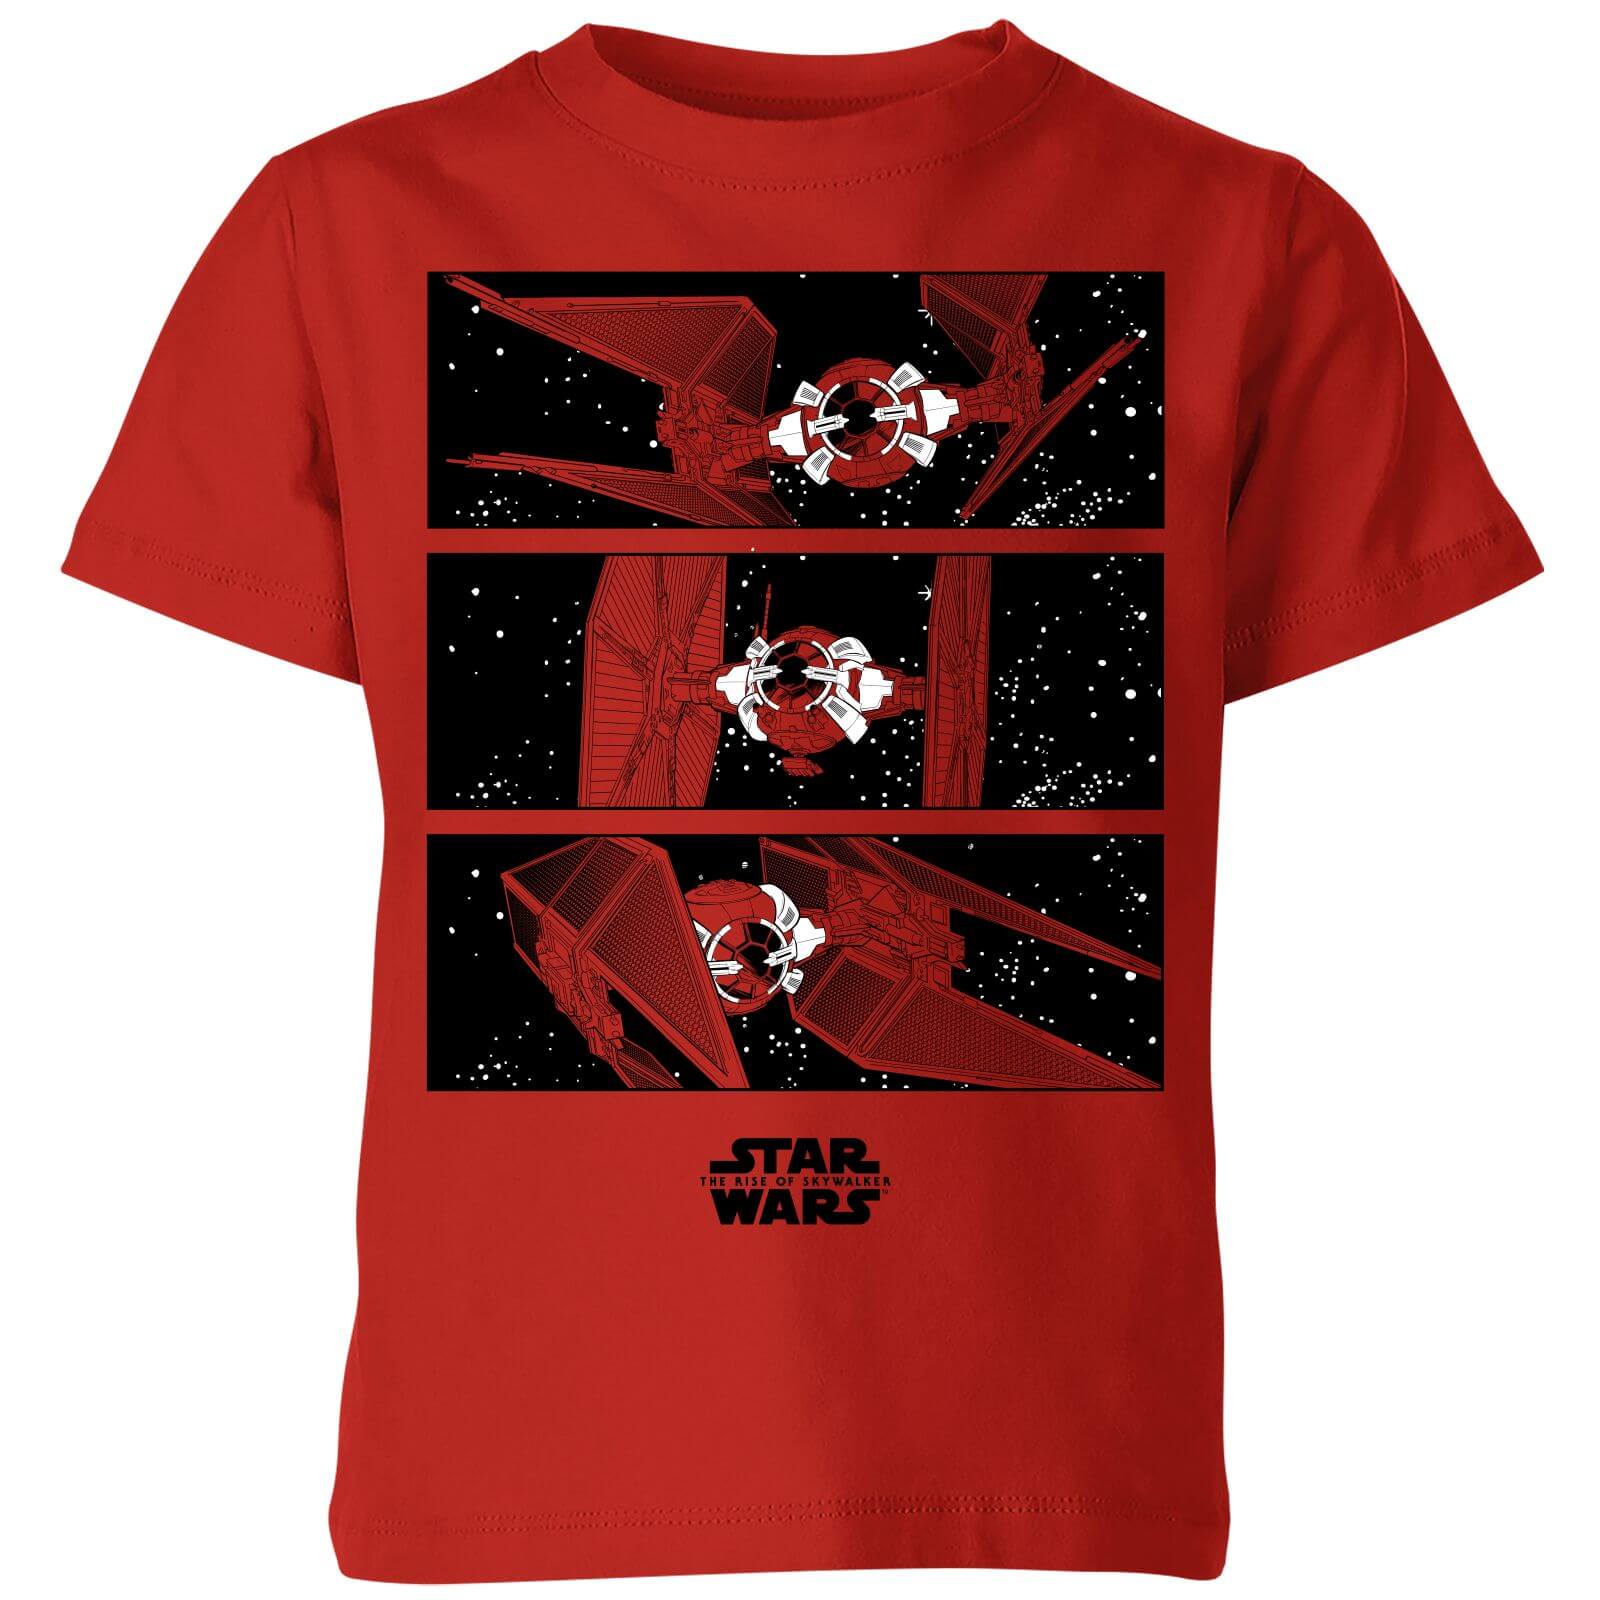 The Rise of Skywalker Tie Fighter Kids' T-Shirt - Red - 3-4 Years